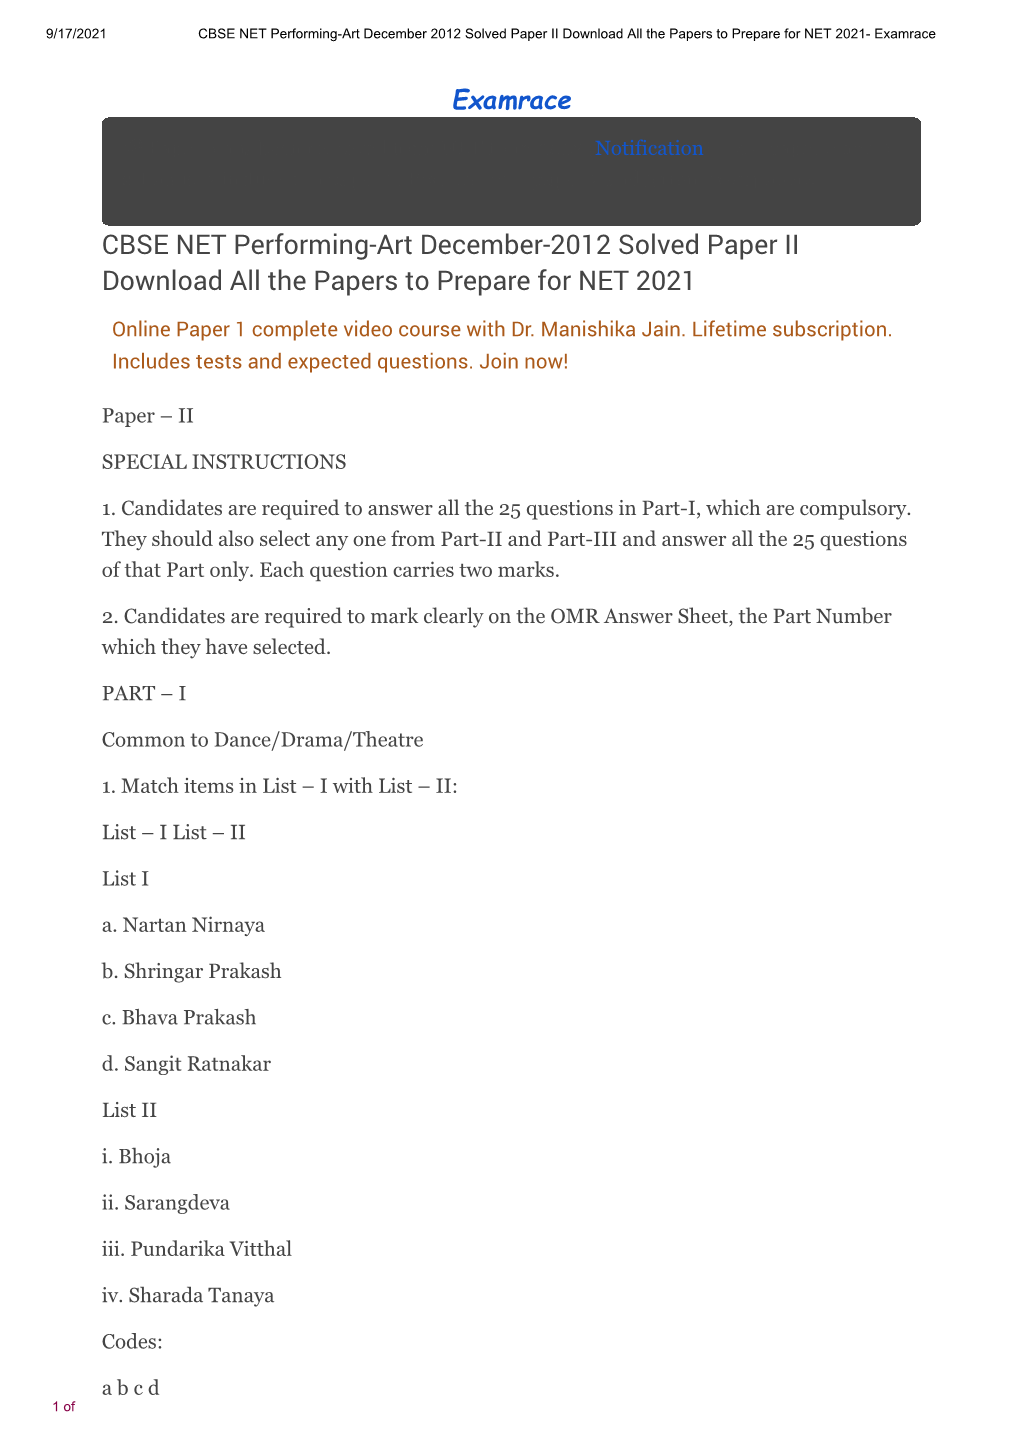 CBSE NET Performing-Art December-2012 Solved Paper II Download All the Papers to Prepare for NET 2021